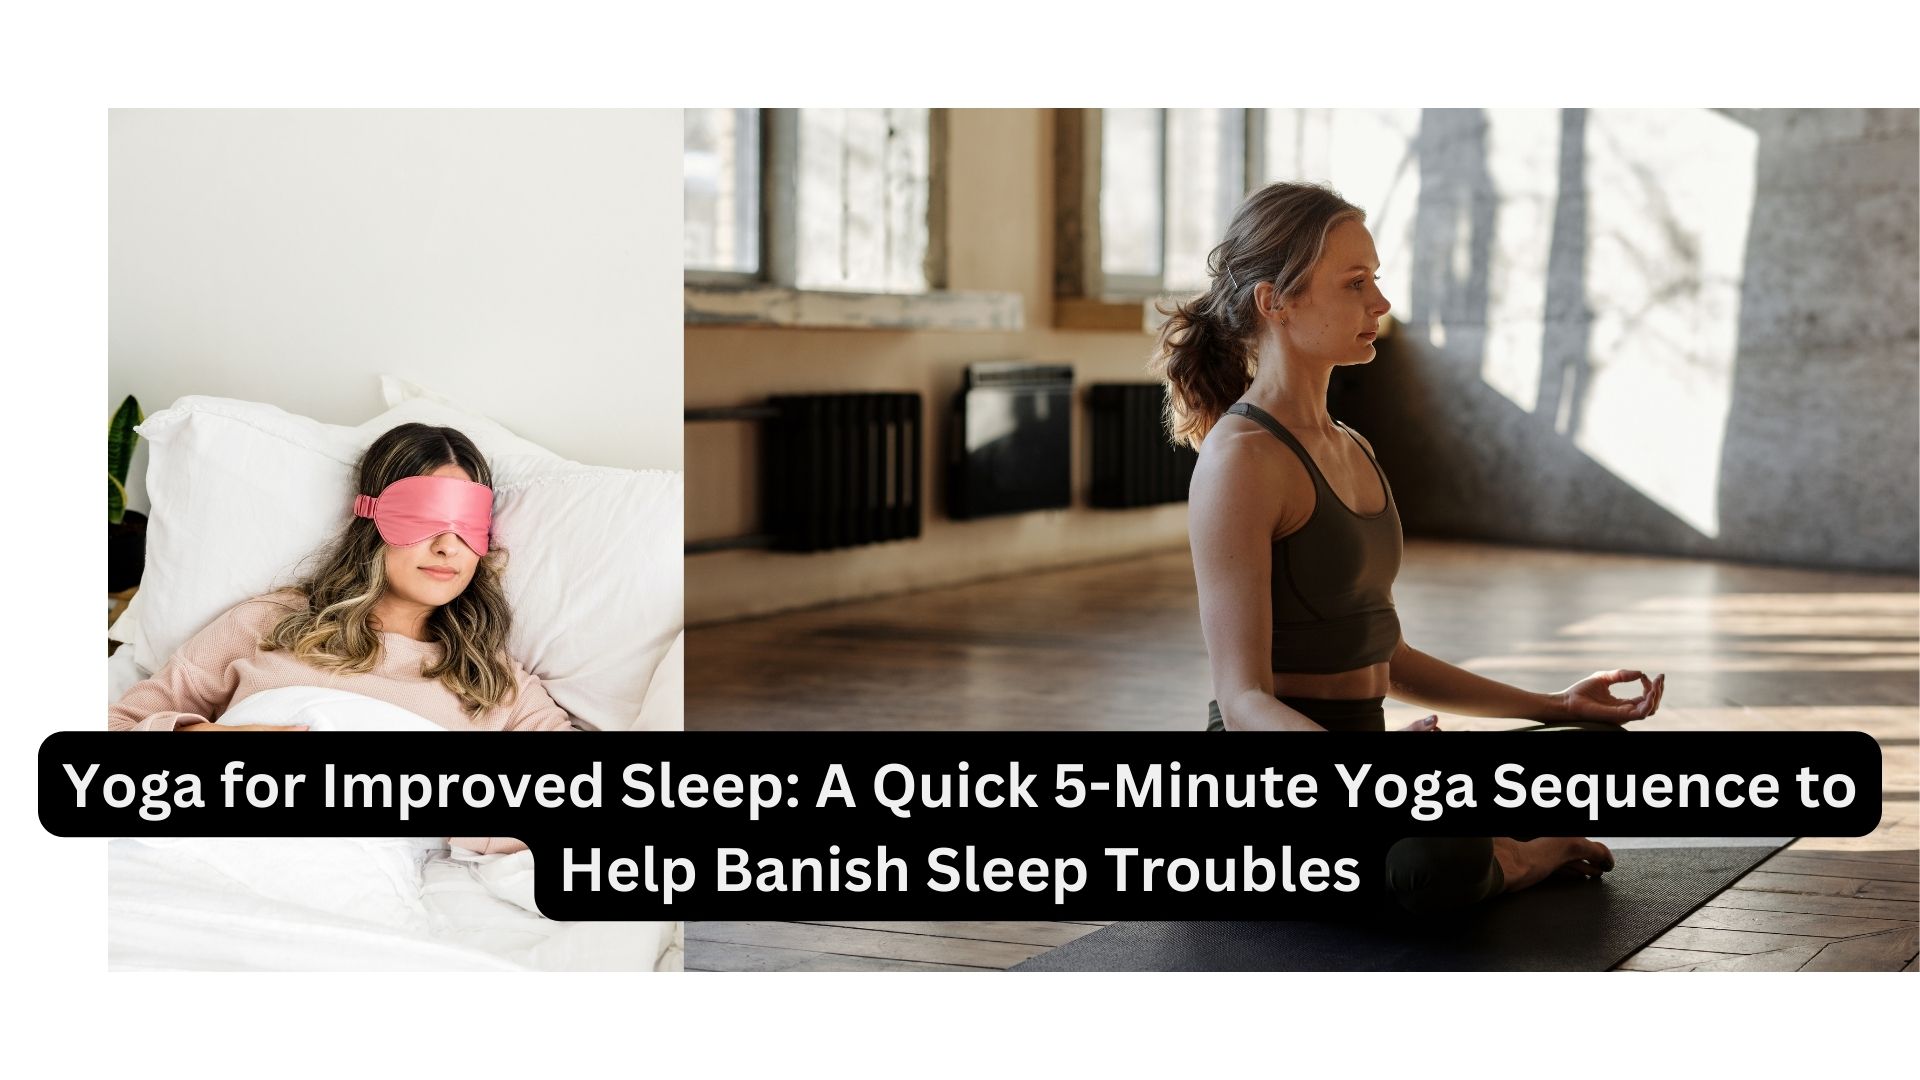 Yoga for Improved Sleep: A Quick 5-Minute Yoga Sequence to Help Banish Sleep Troubles